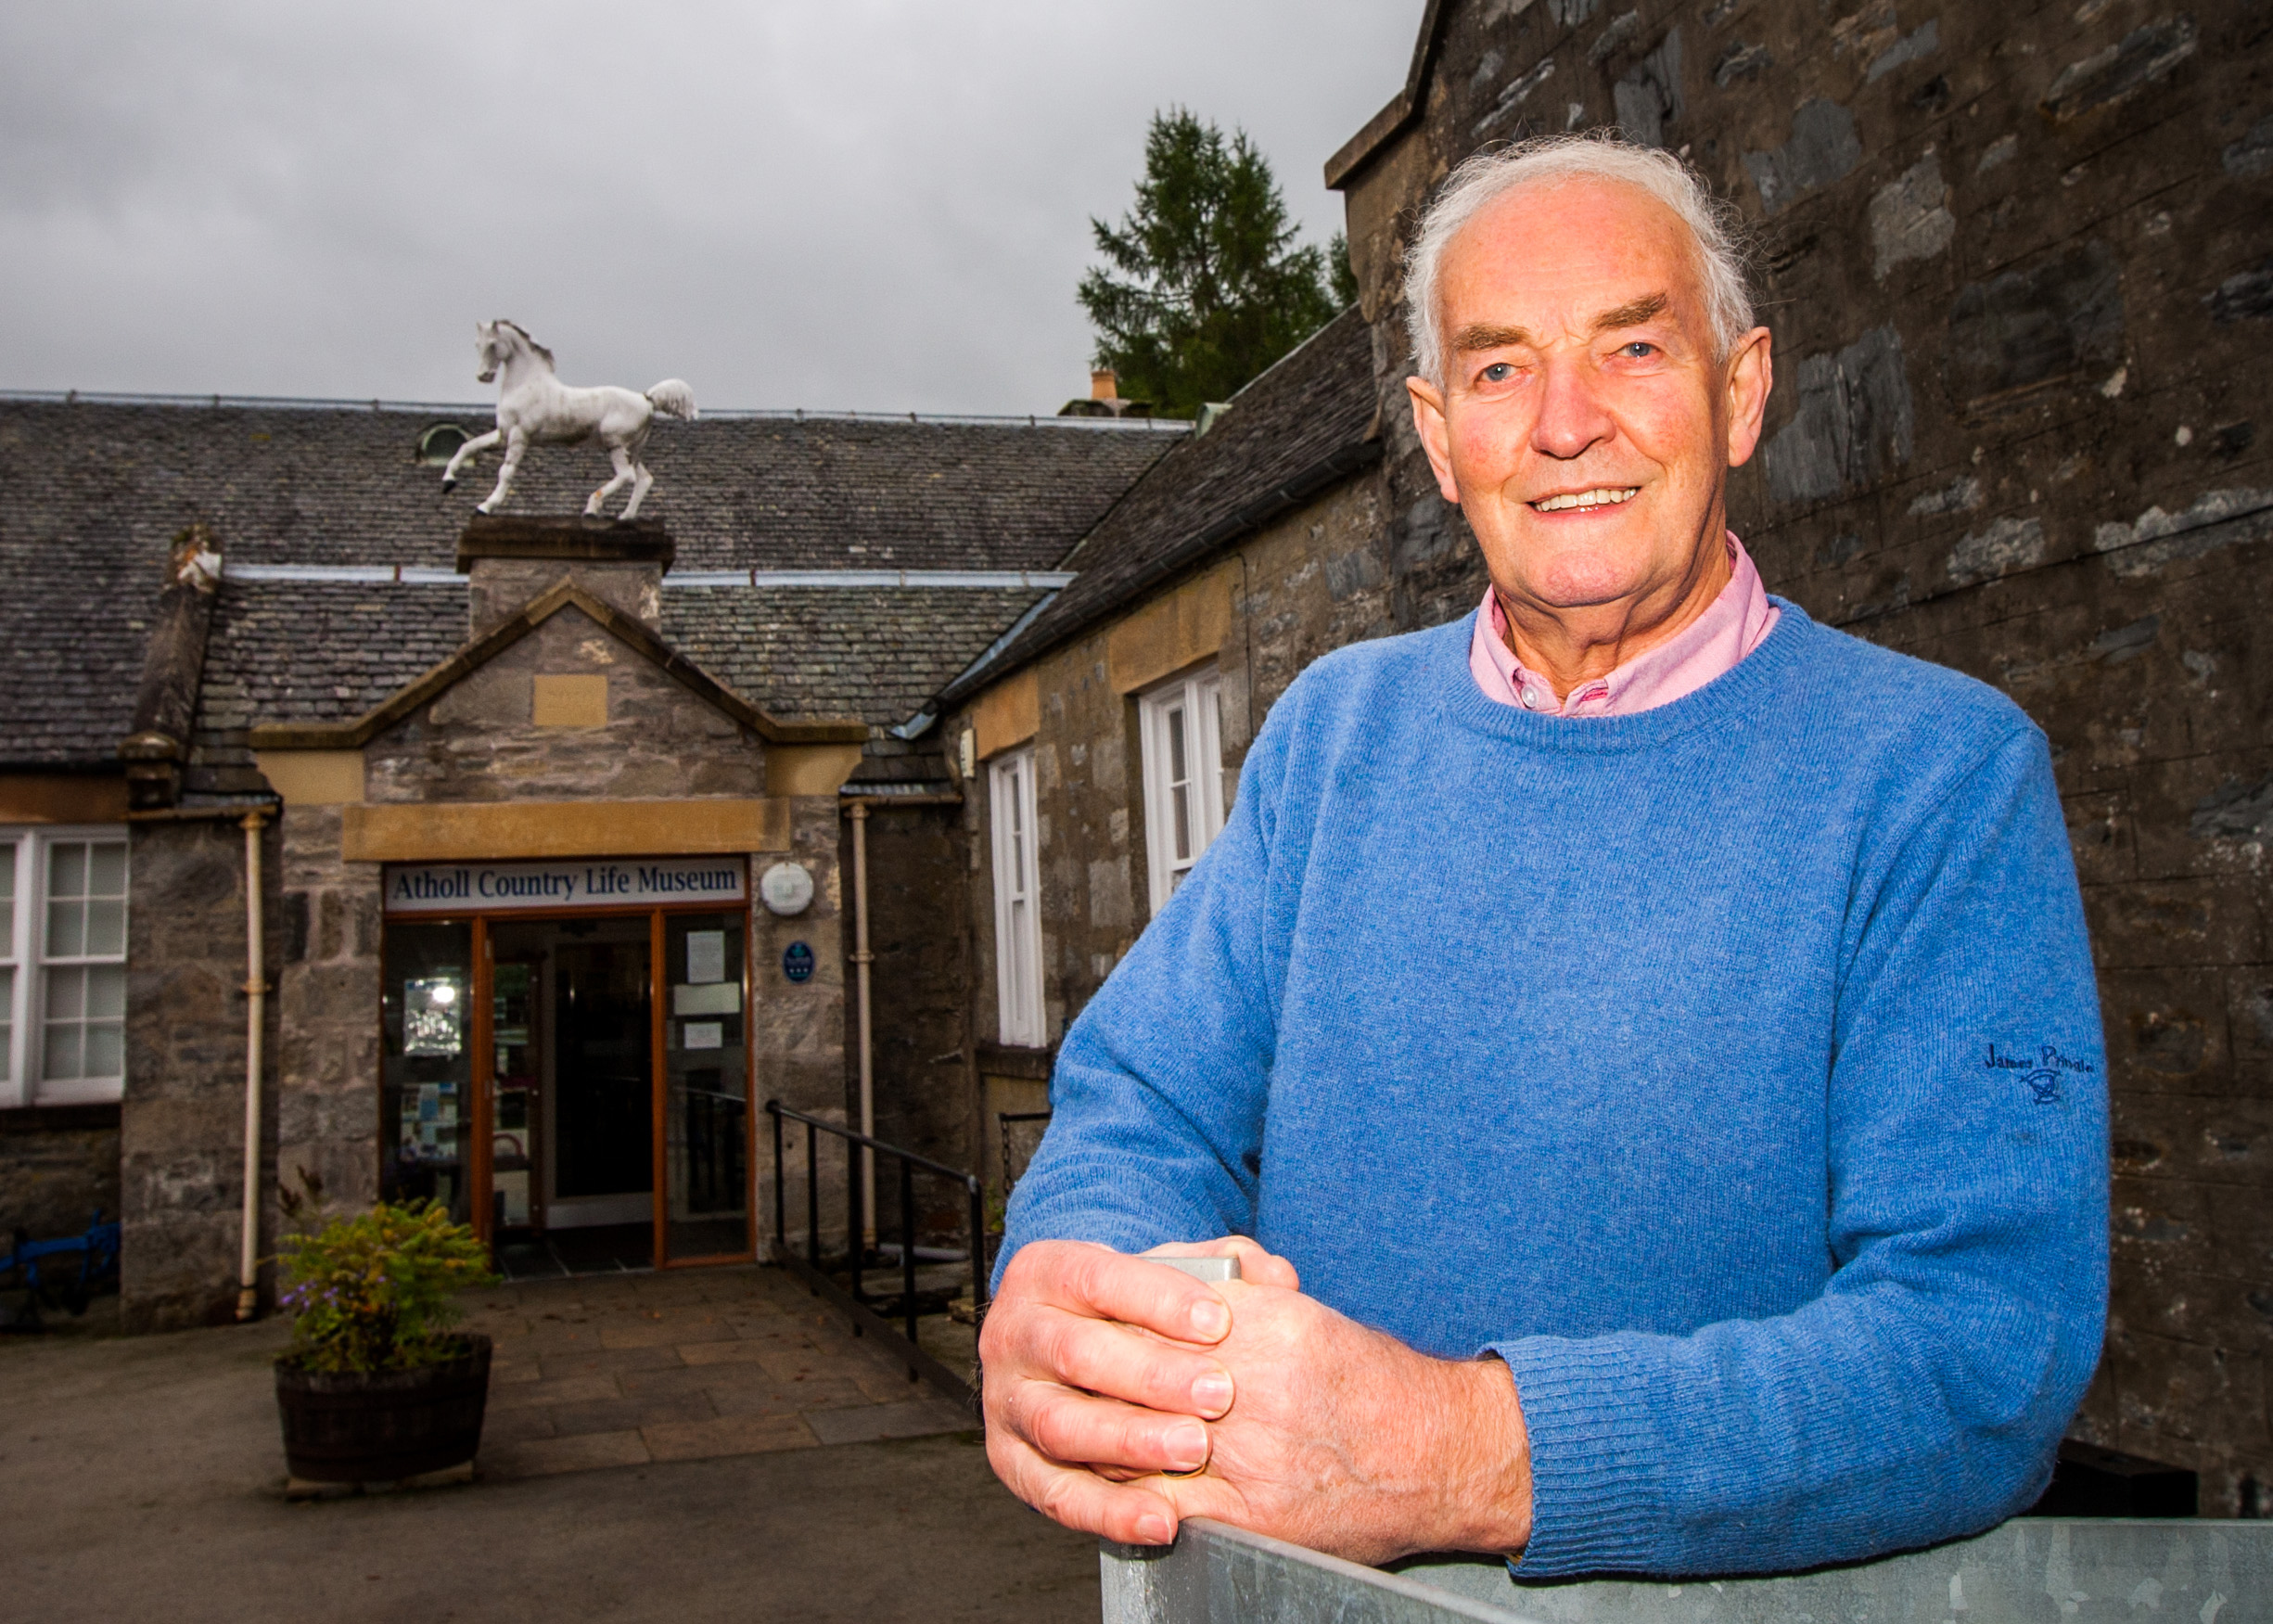 John Cameron at Atholl Country Life Museum in 2016.